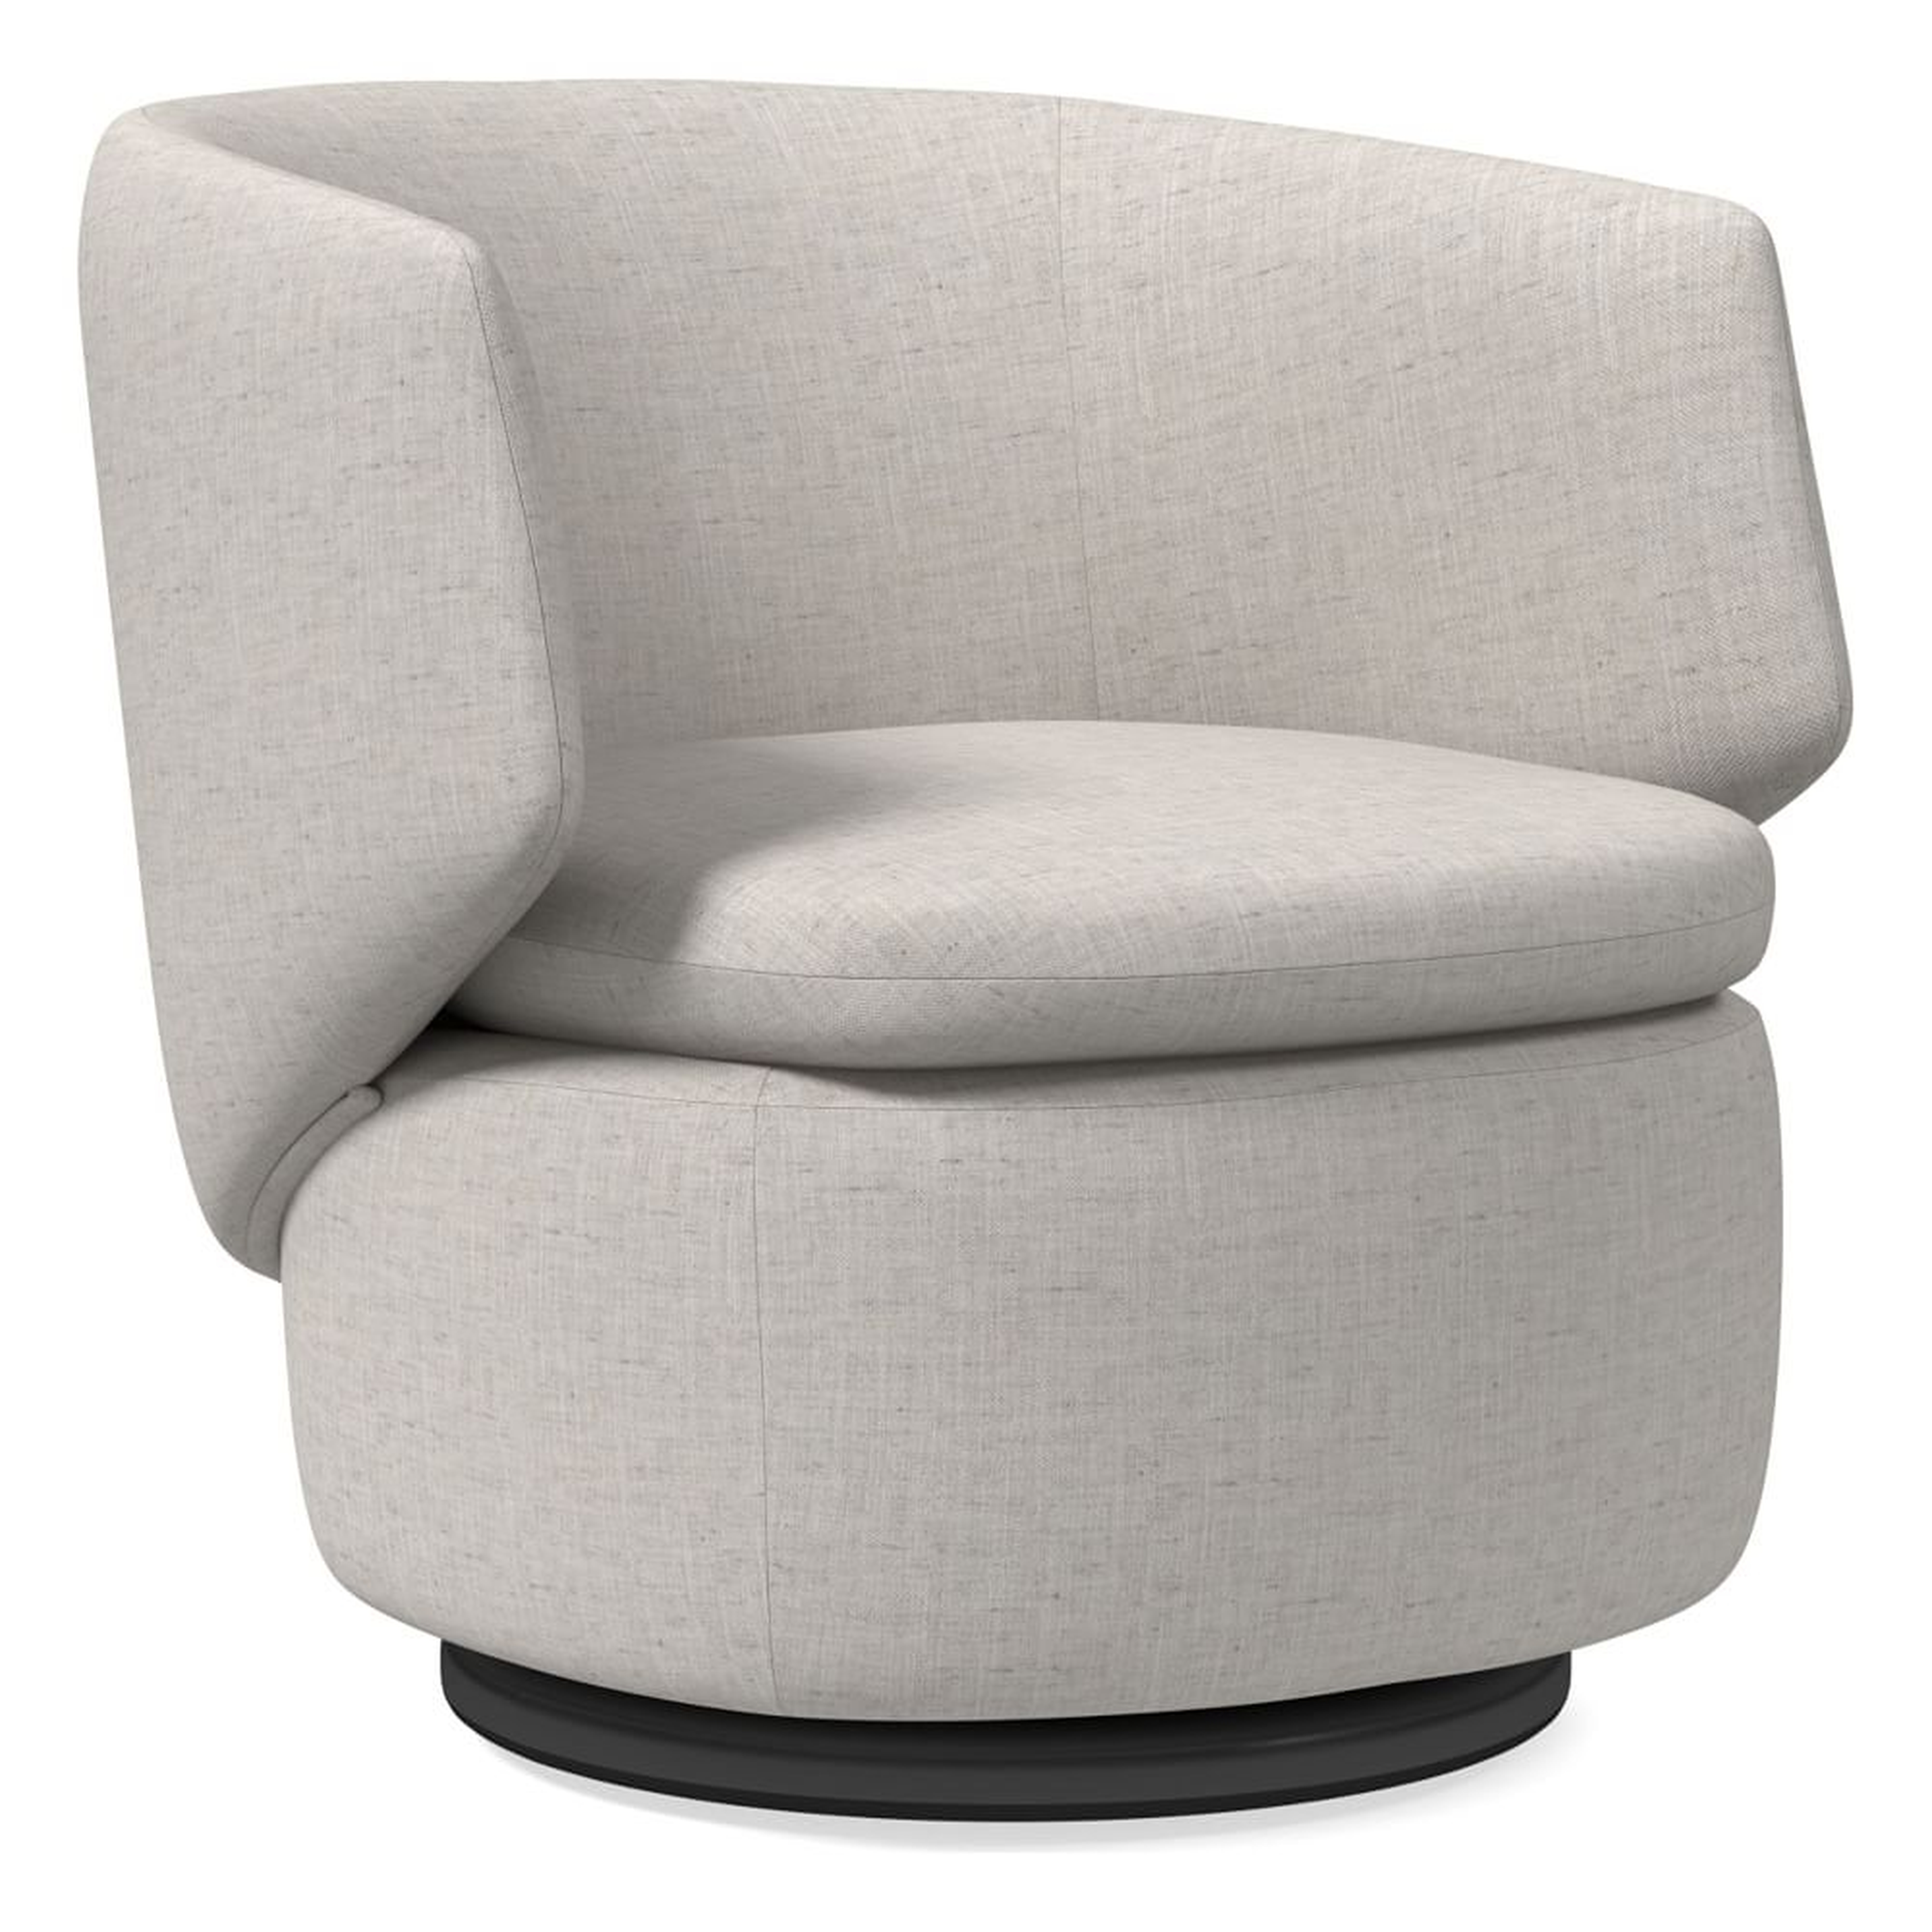 Crescent Swivel Chair, Poly, Performance Coastal Linen, White, Concealed Supports - West Elm